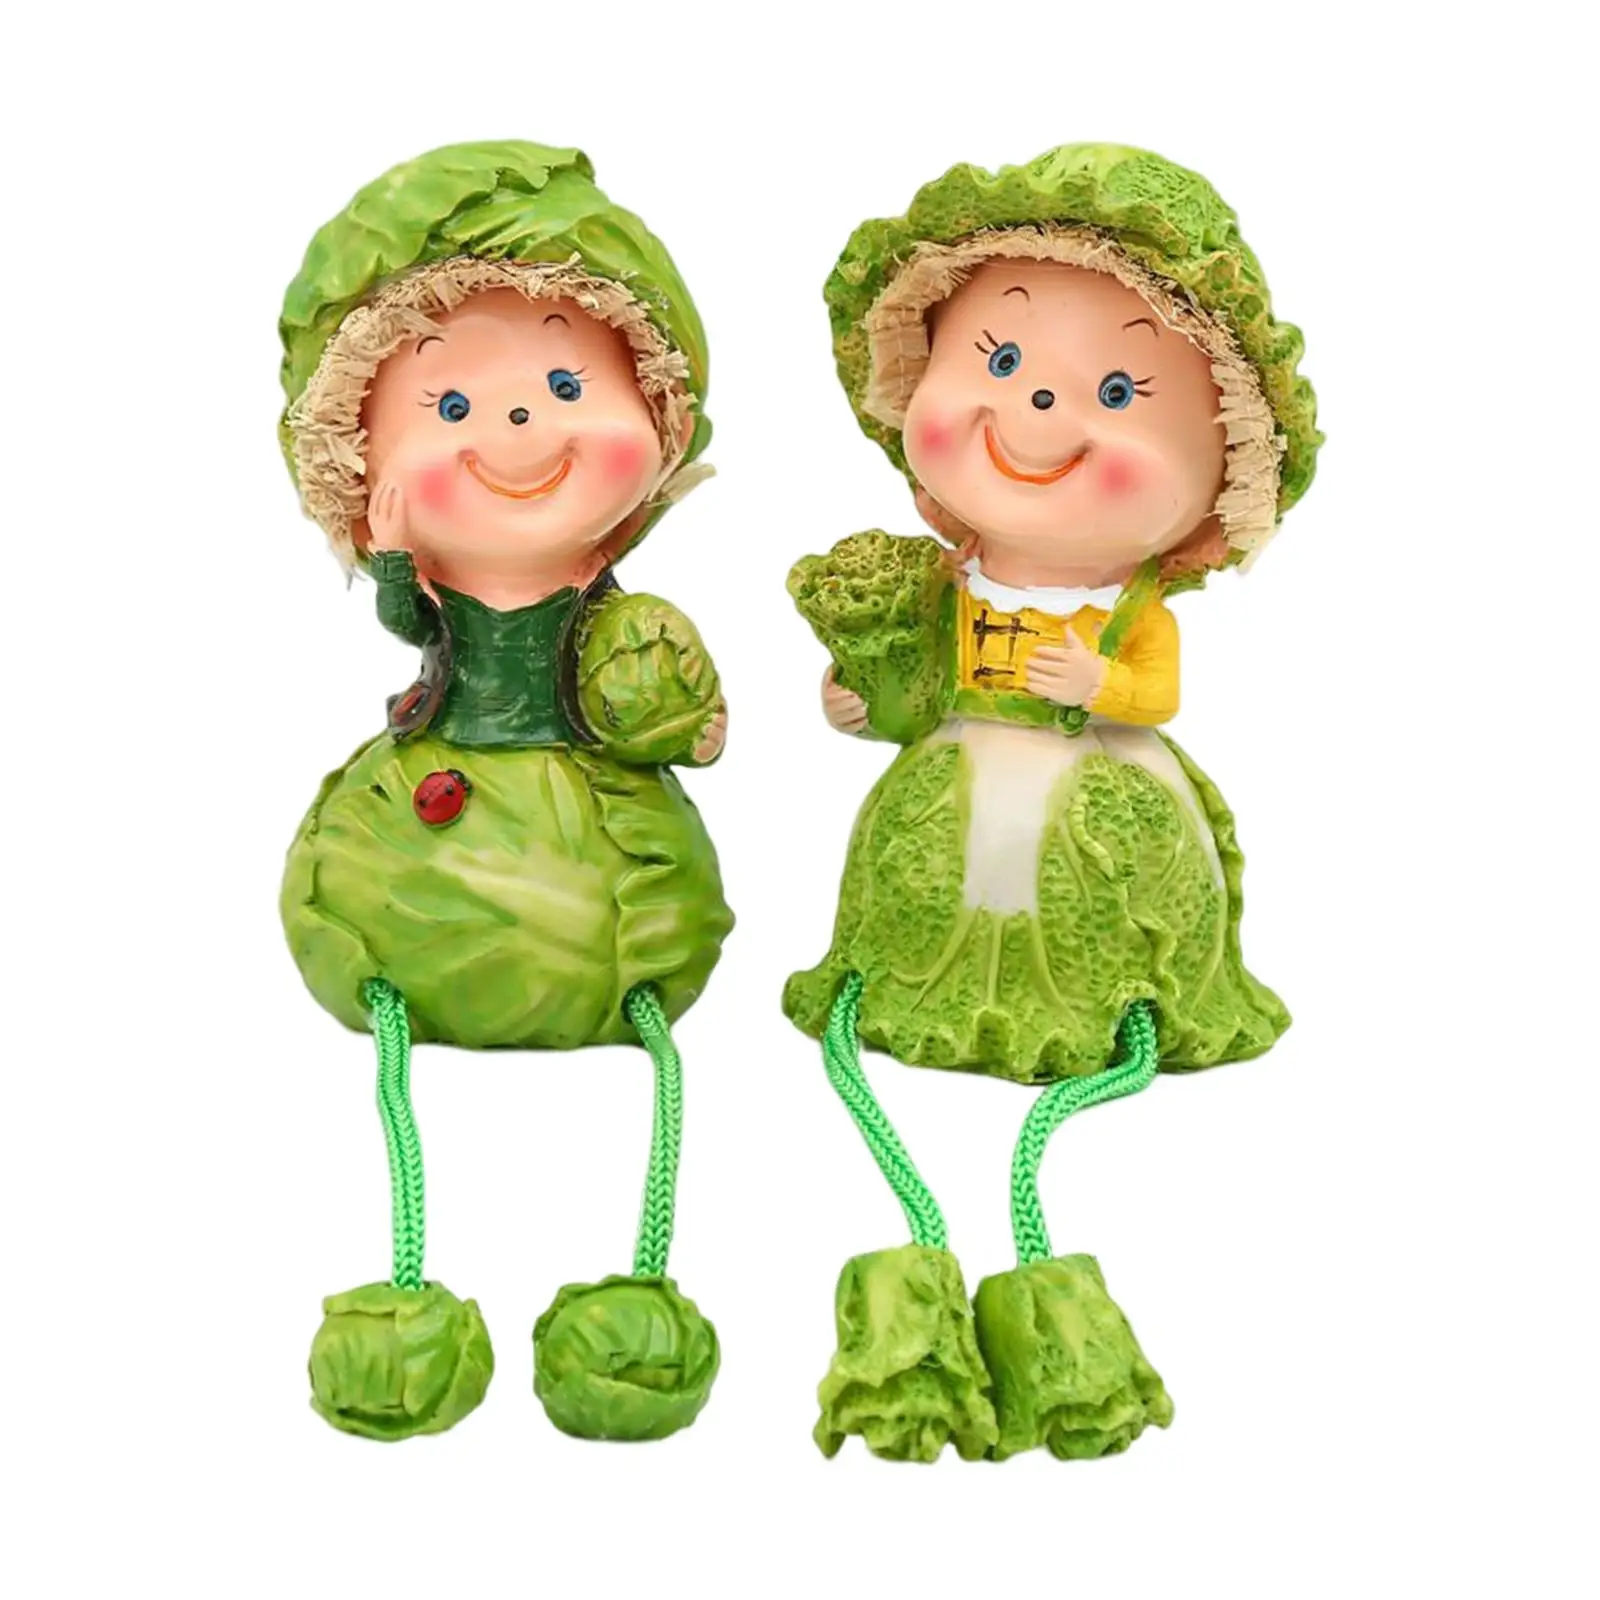 2x Hanging Foot Doll Figurine Sculpture Resin Statue for Table Party Decors